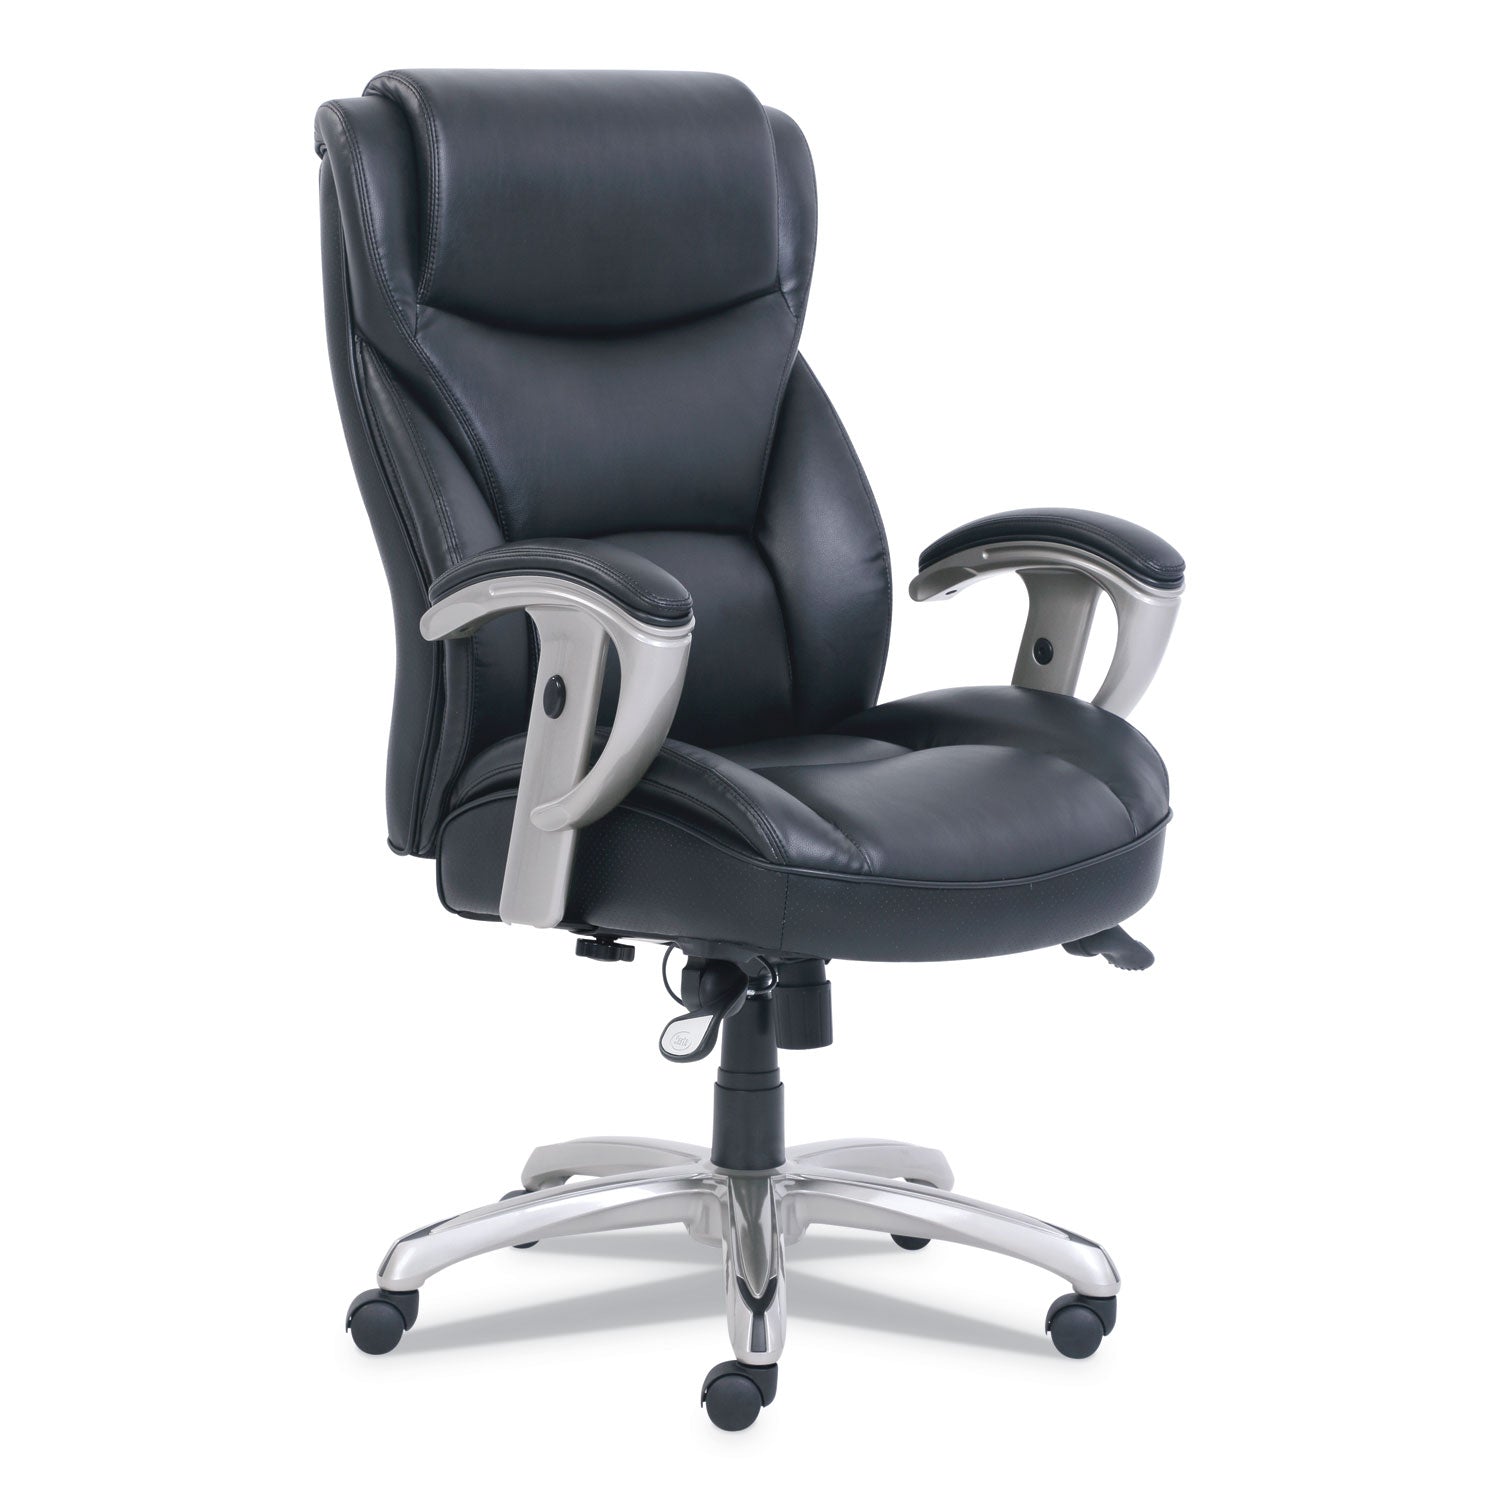 emerson-big-and-tall-task-chair-supports-up-to-400-lb-195-to-225-seat-height-black-seat-back-silver-base_srj49416blk - 1